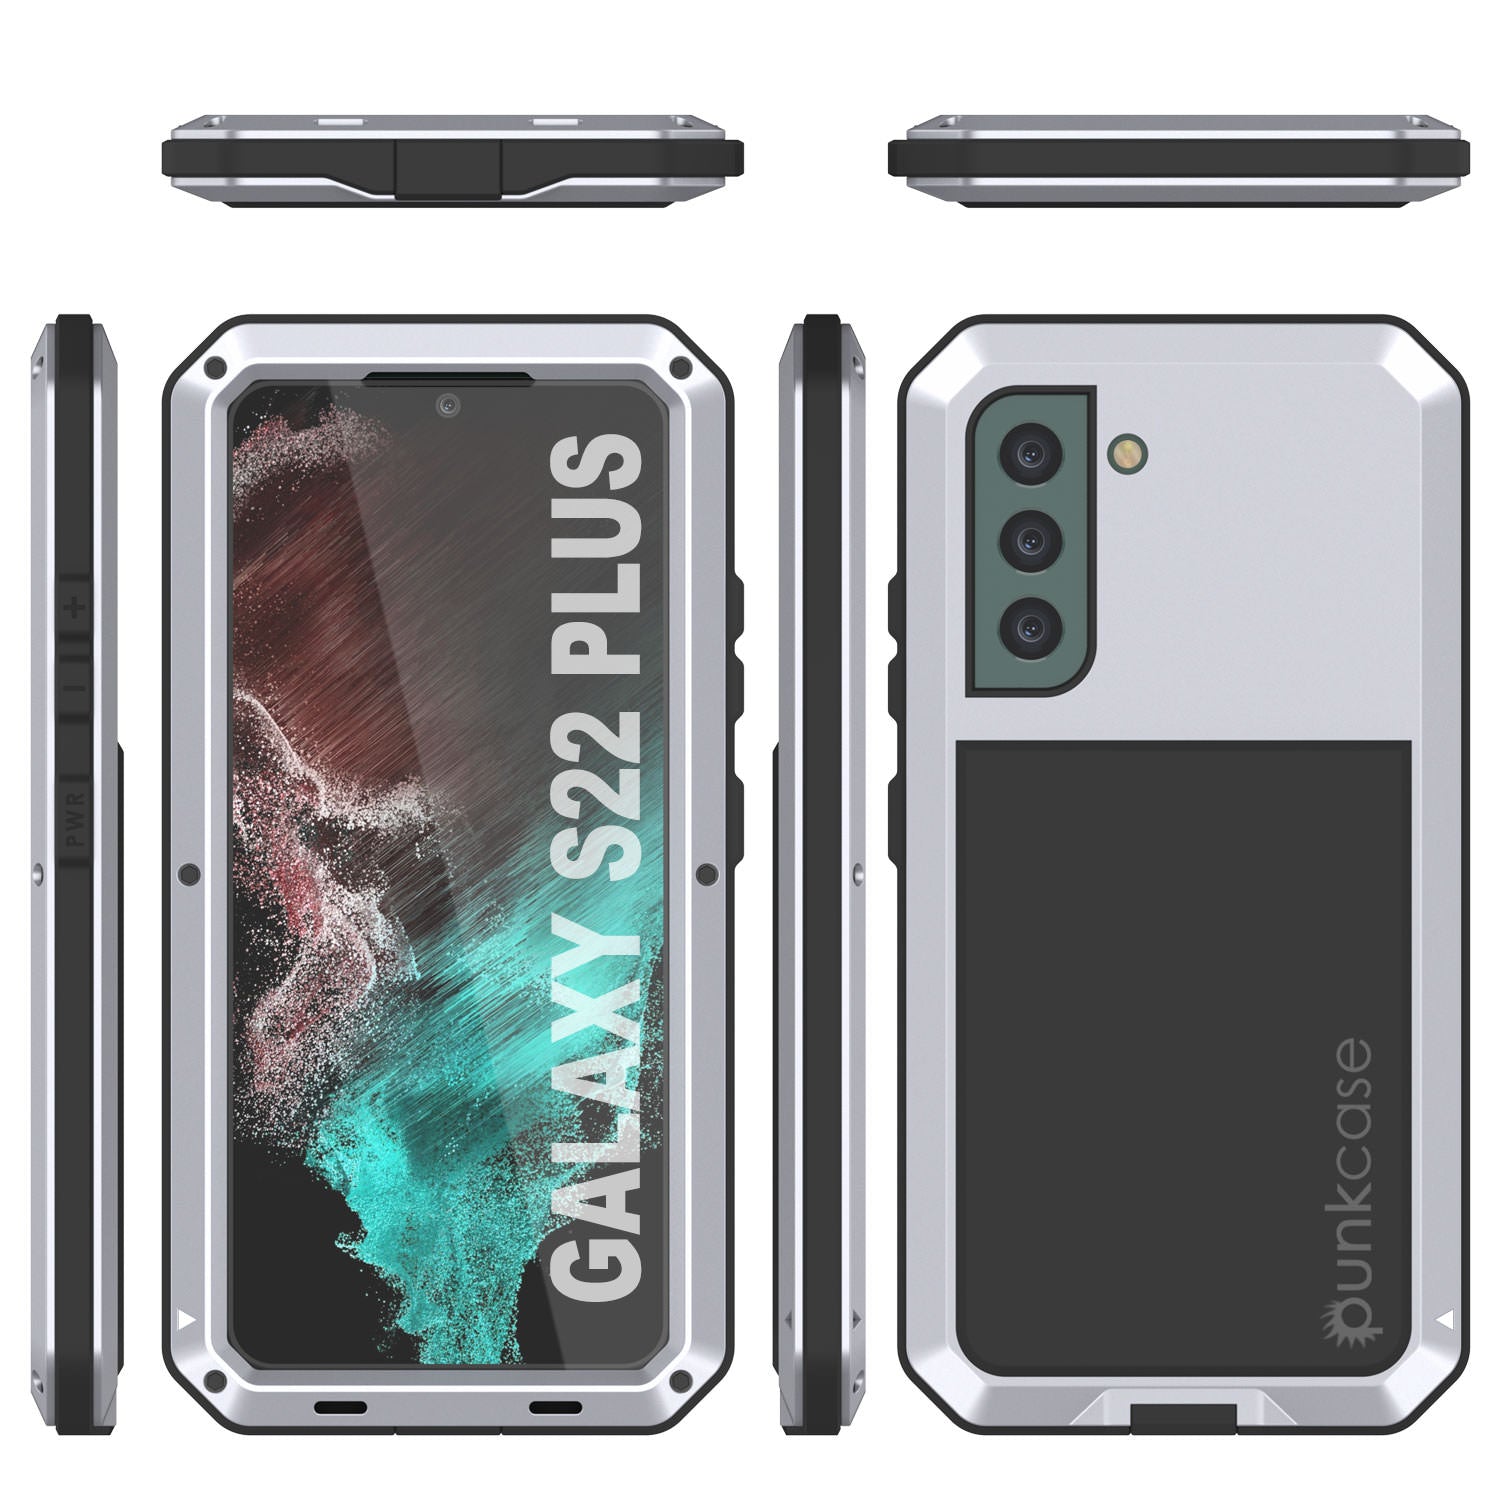 Galaxy S22+ Plus Metal Case, Heavy Duty Military Grade Rugged Armor Cover [White]